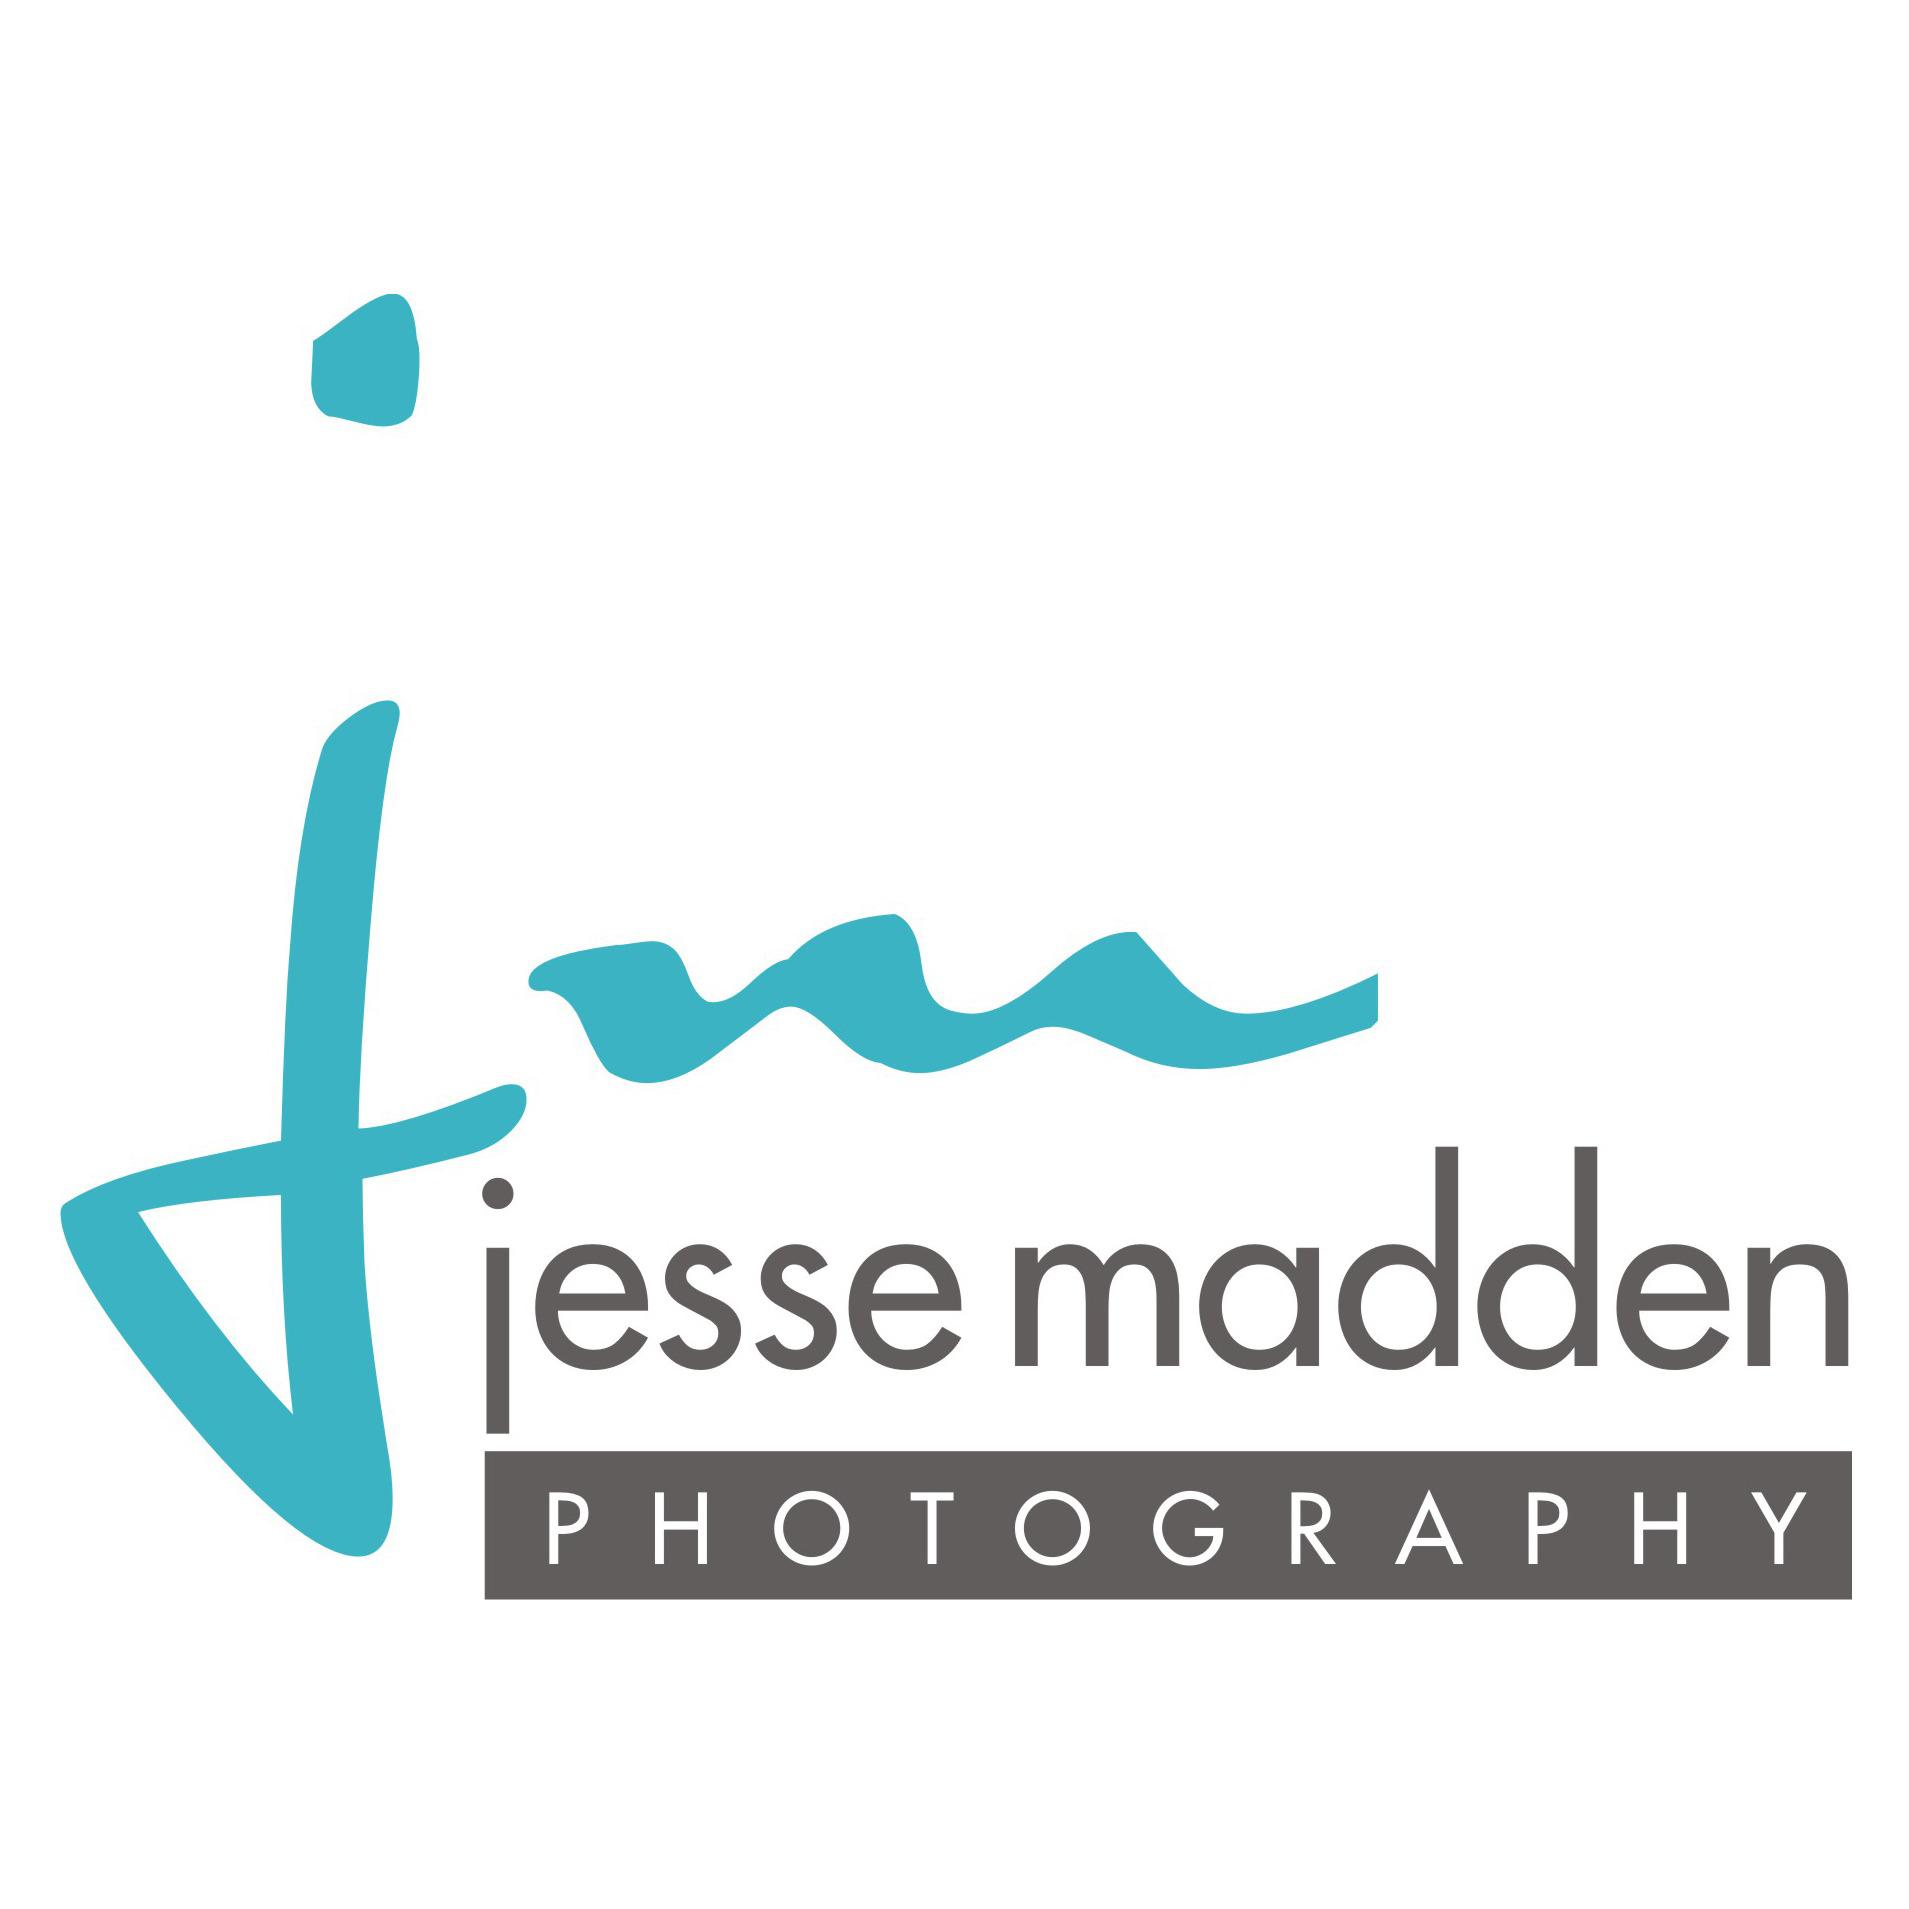 Jesse Madden Photography - Williams Lake, BC - (250)302-2772 | ShowMeLocal.com